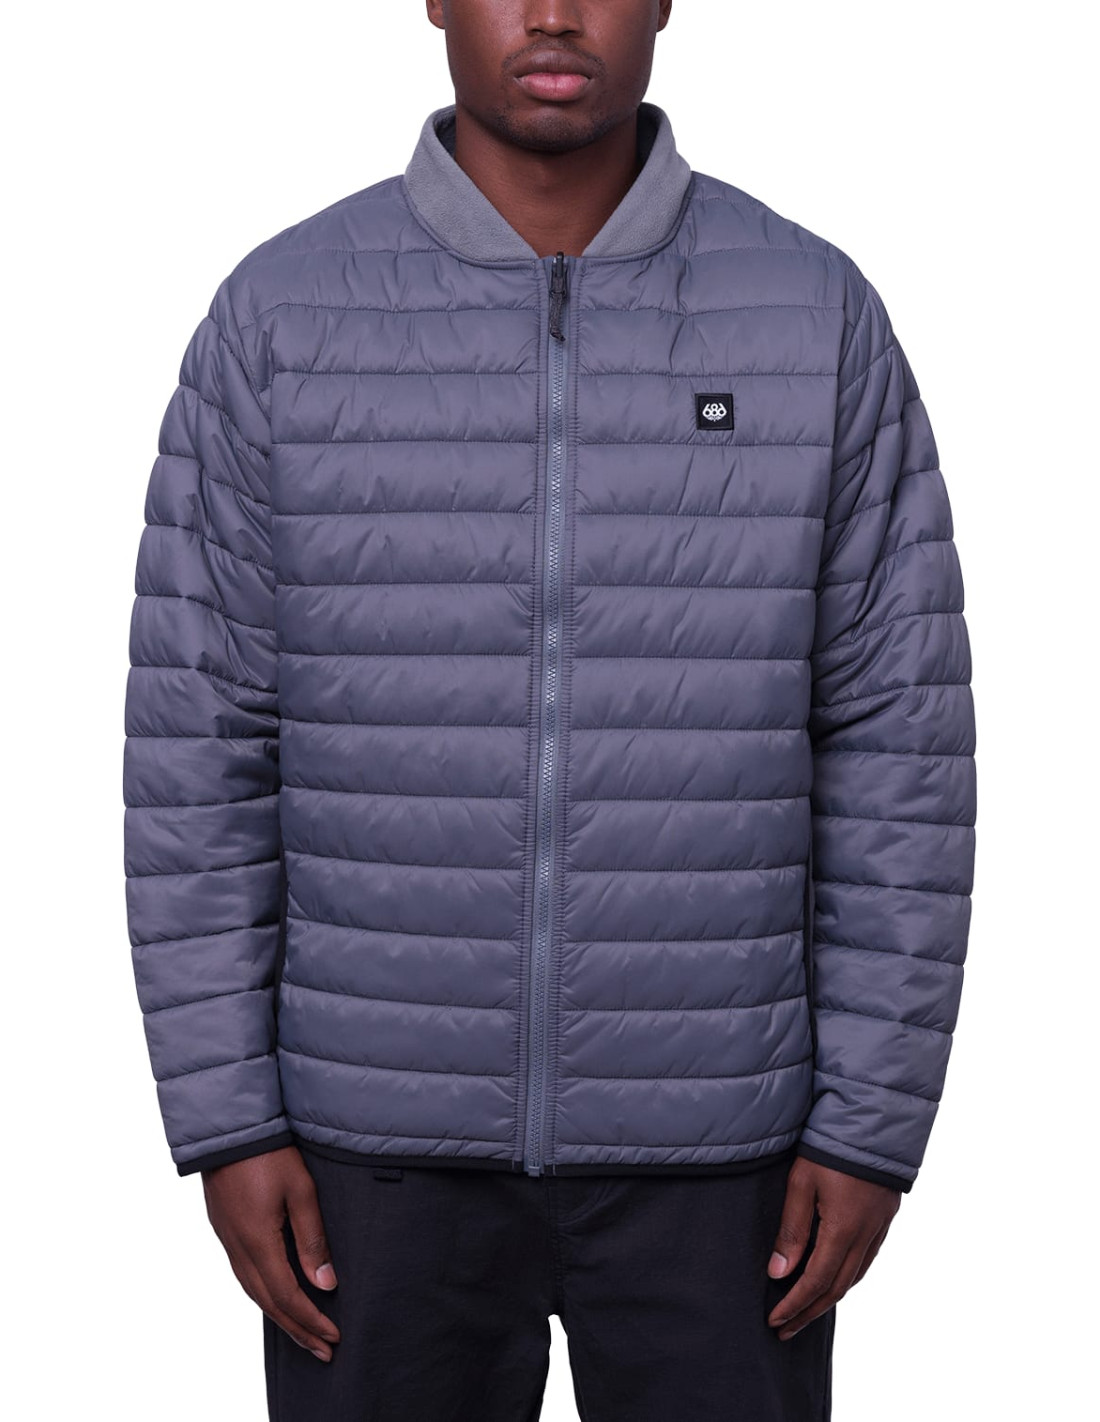 MNS THERMAL PUFF JACKET